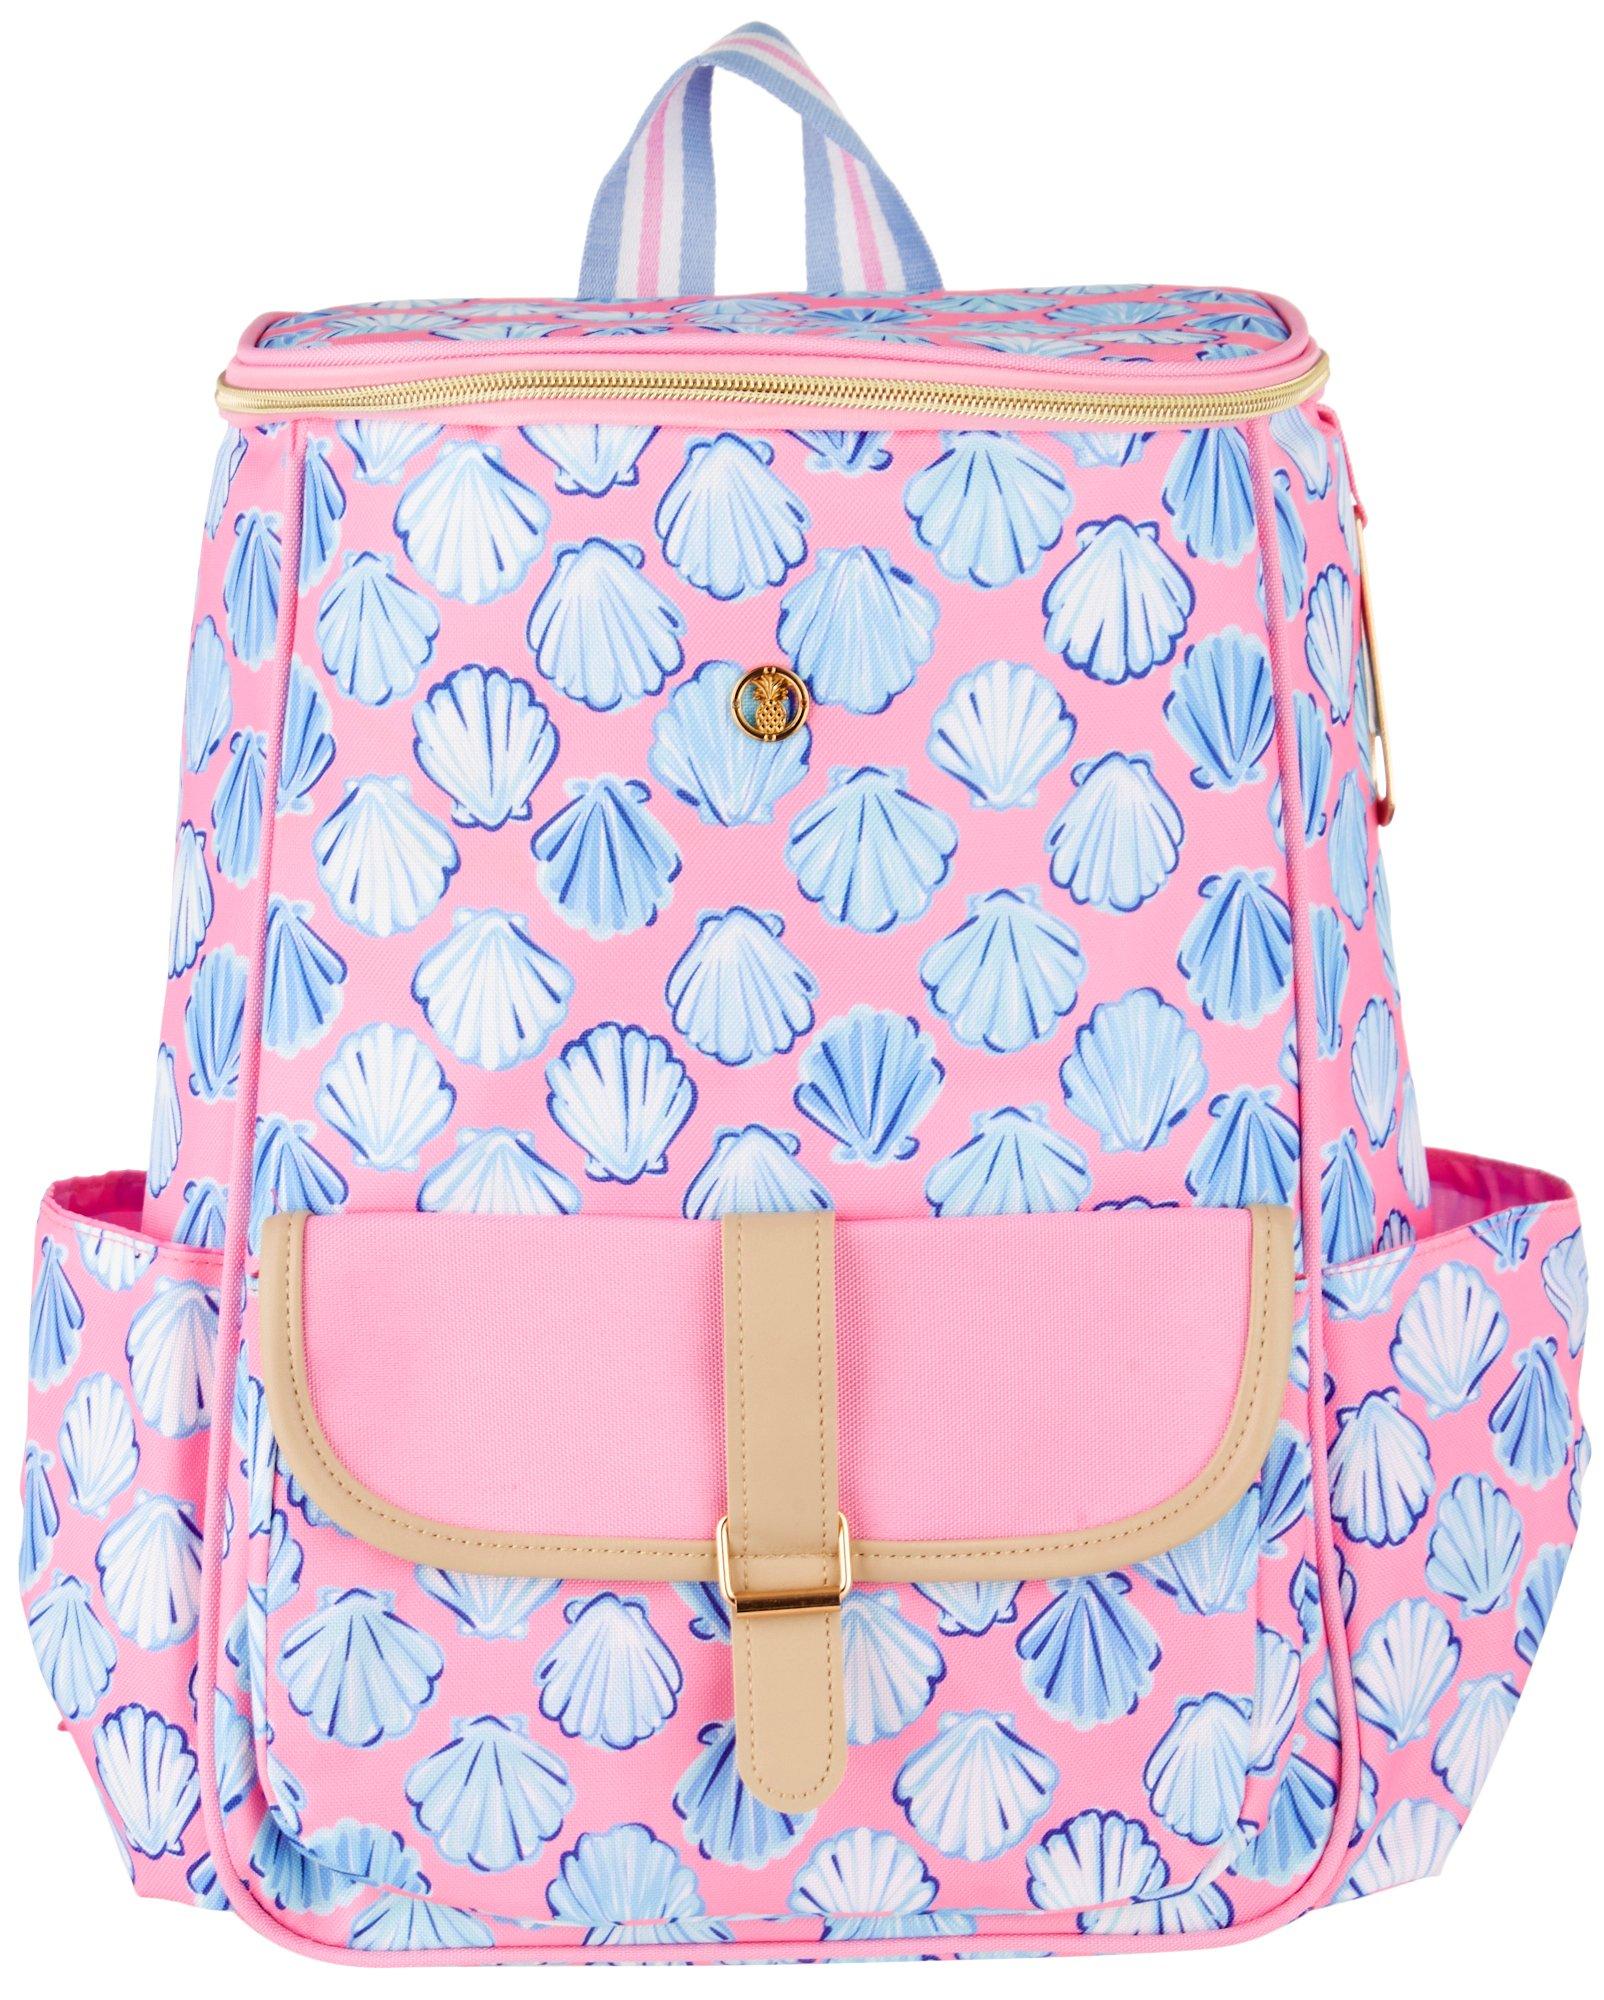 Clam Print Backpack Cooler